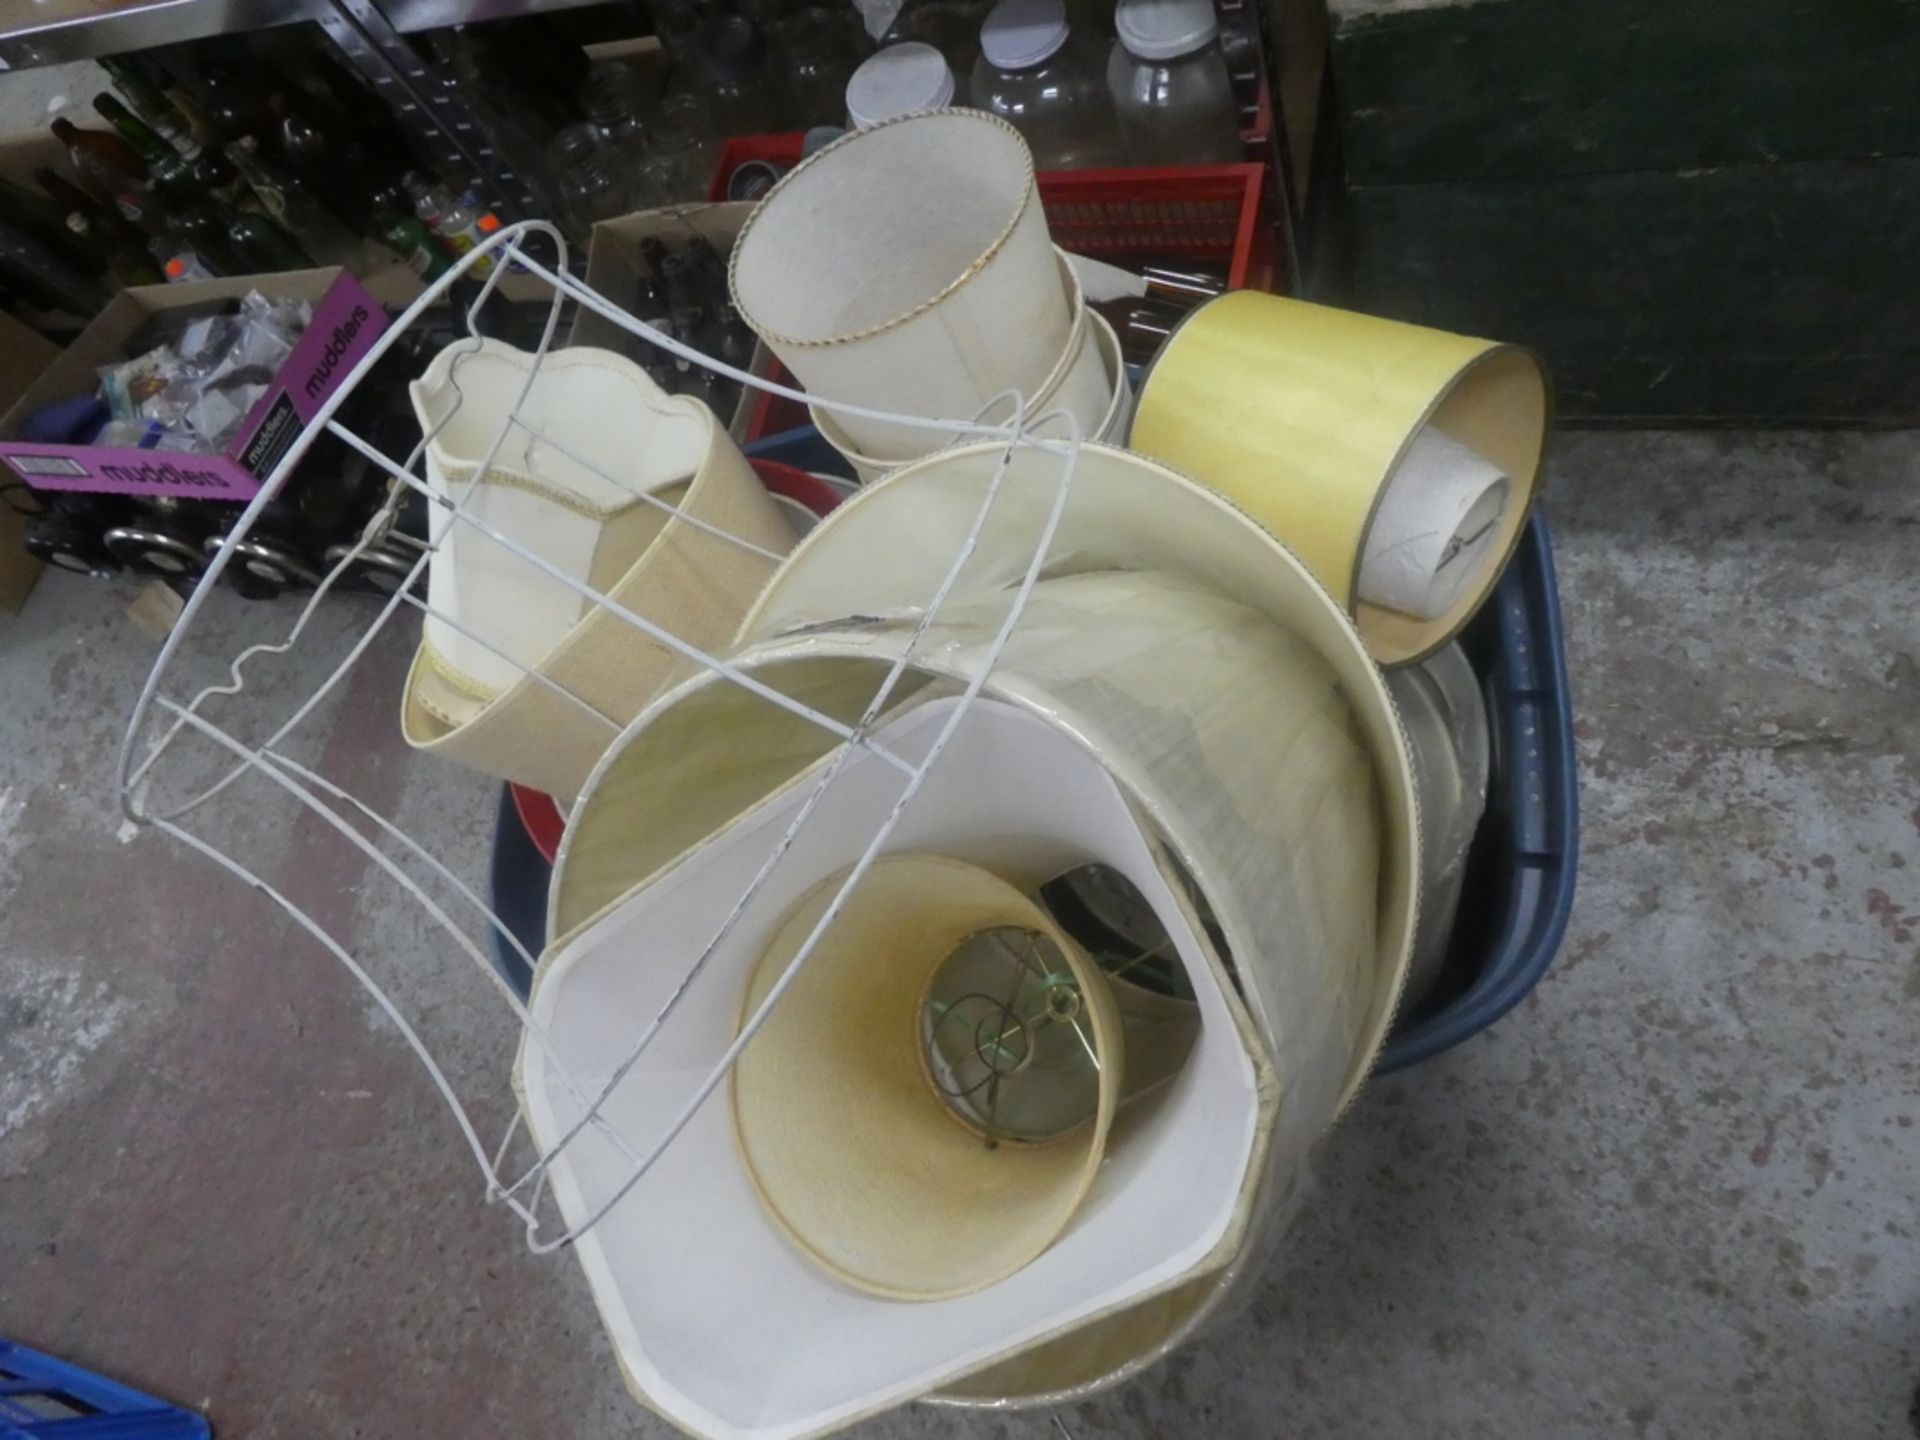 BOX OF VINTAGE CLOTHES HANGERS & TUB OF LAMP SHADES - Image 2 of 3